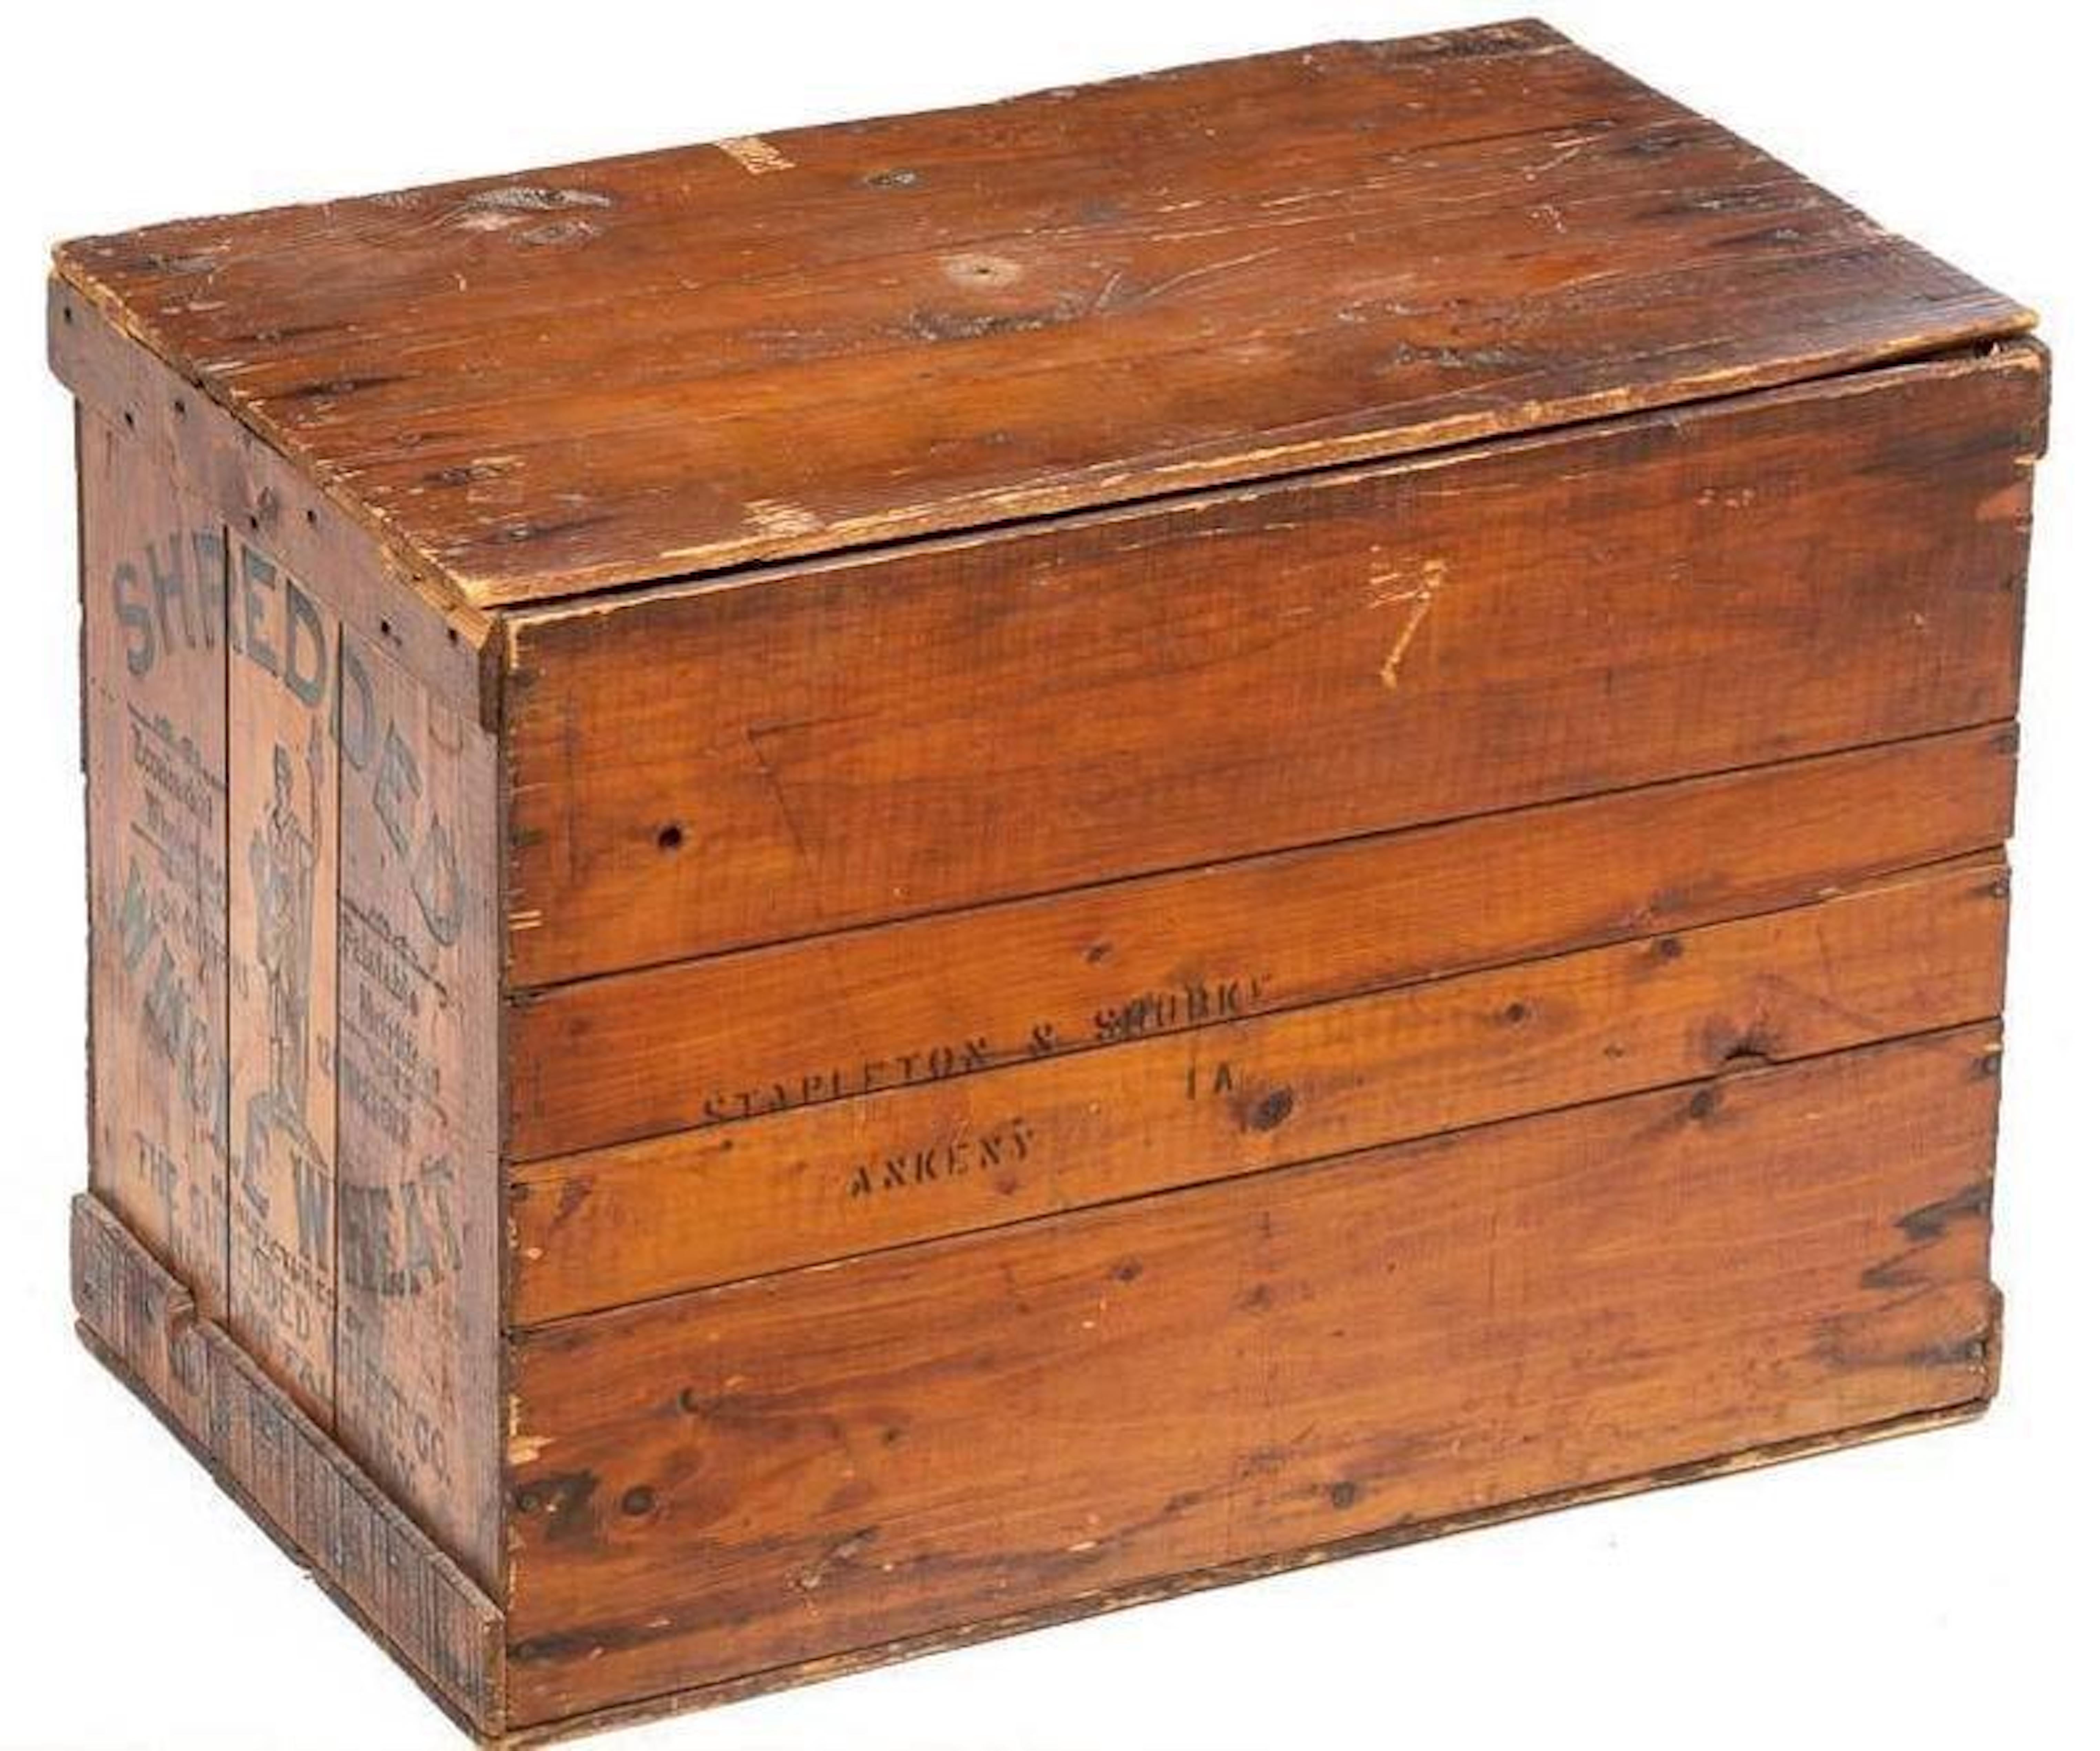 Antique American Stamped Wooden Crate Box with Lid 6